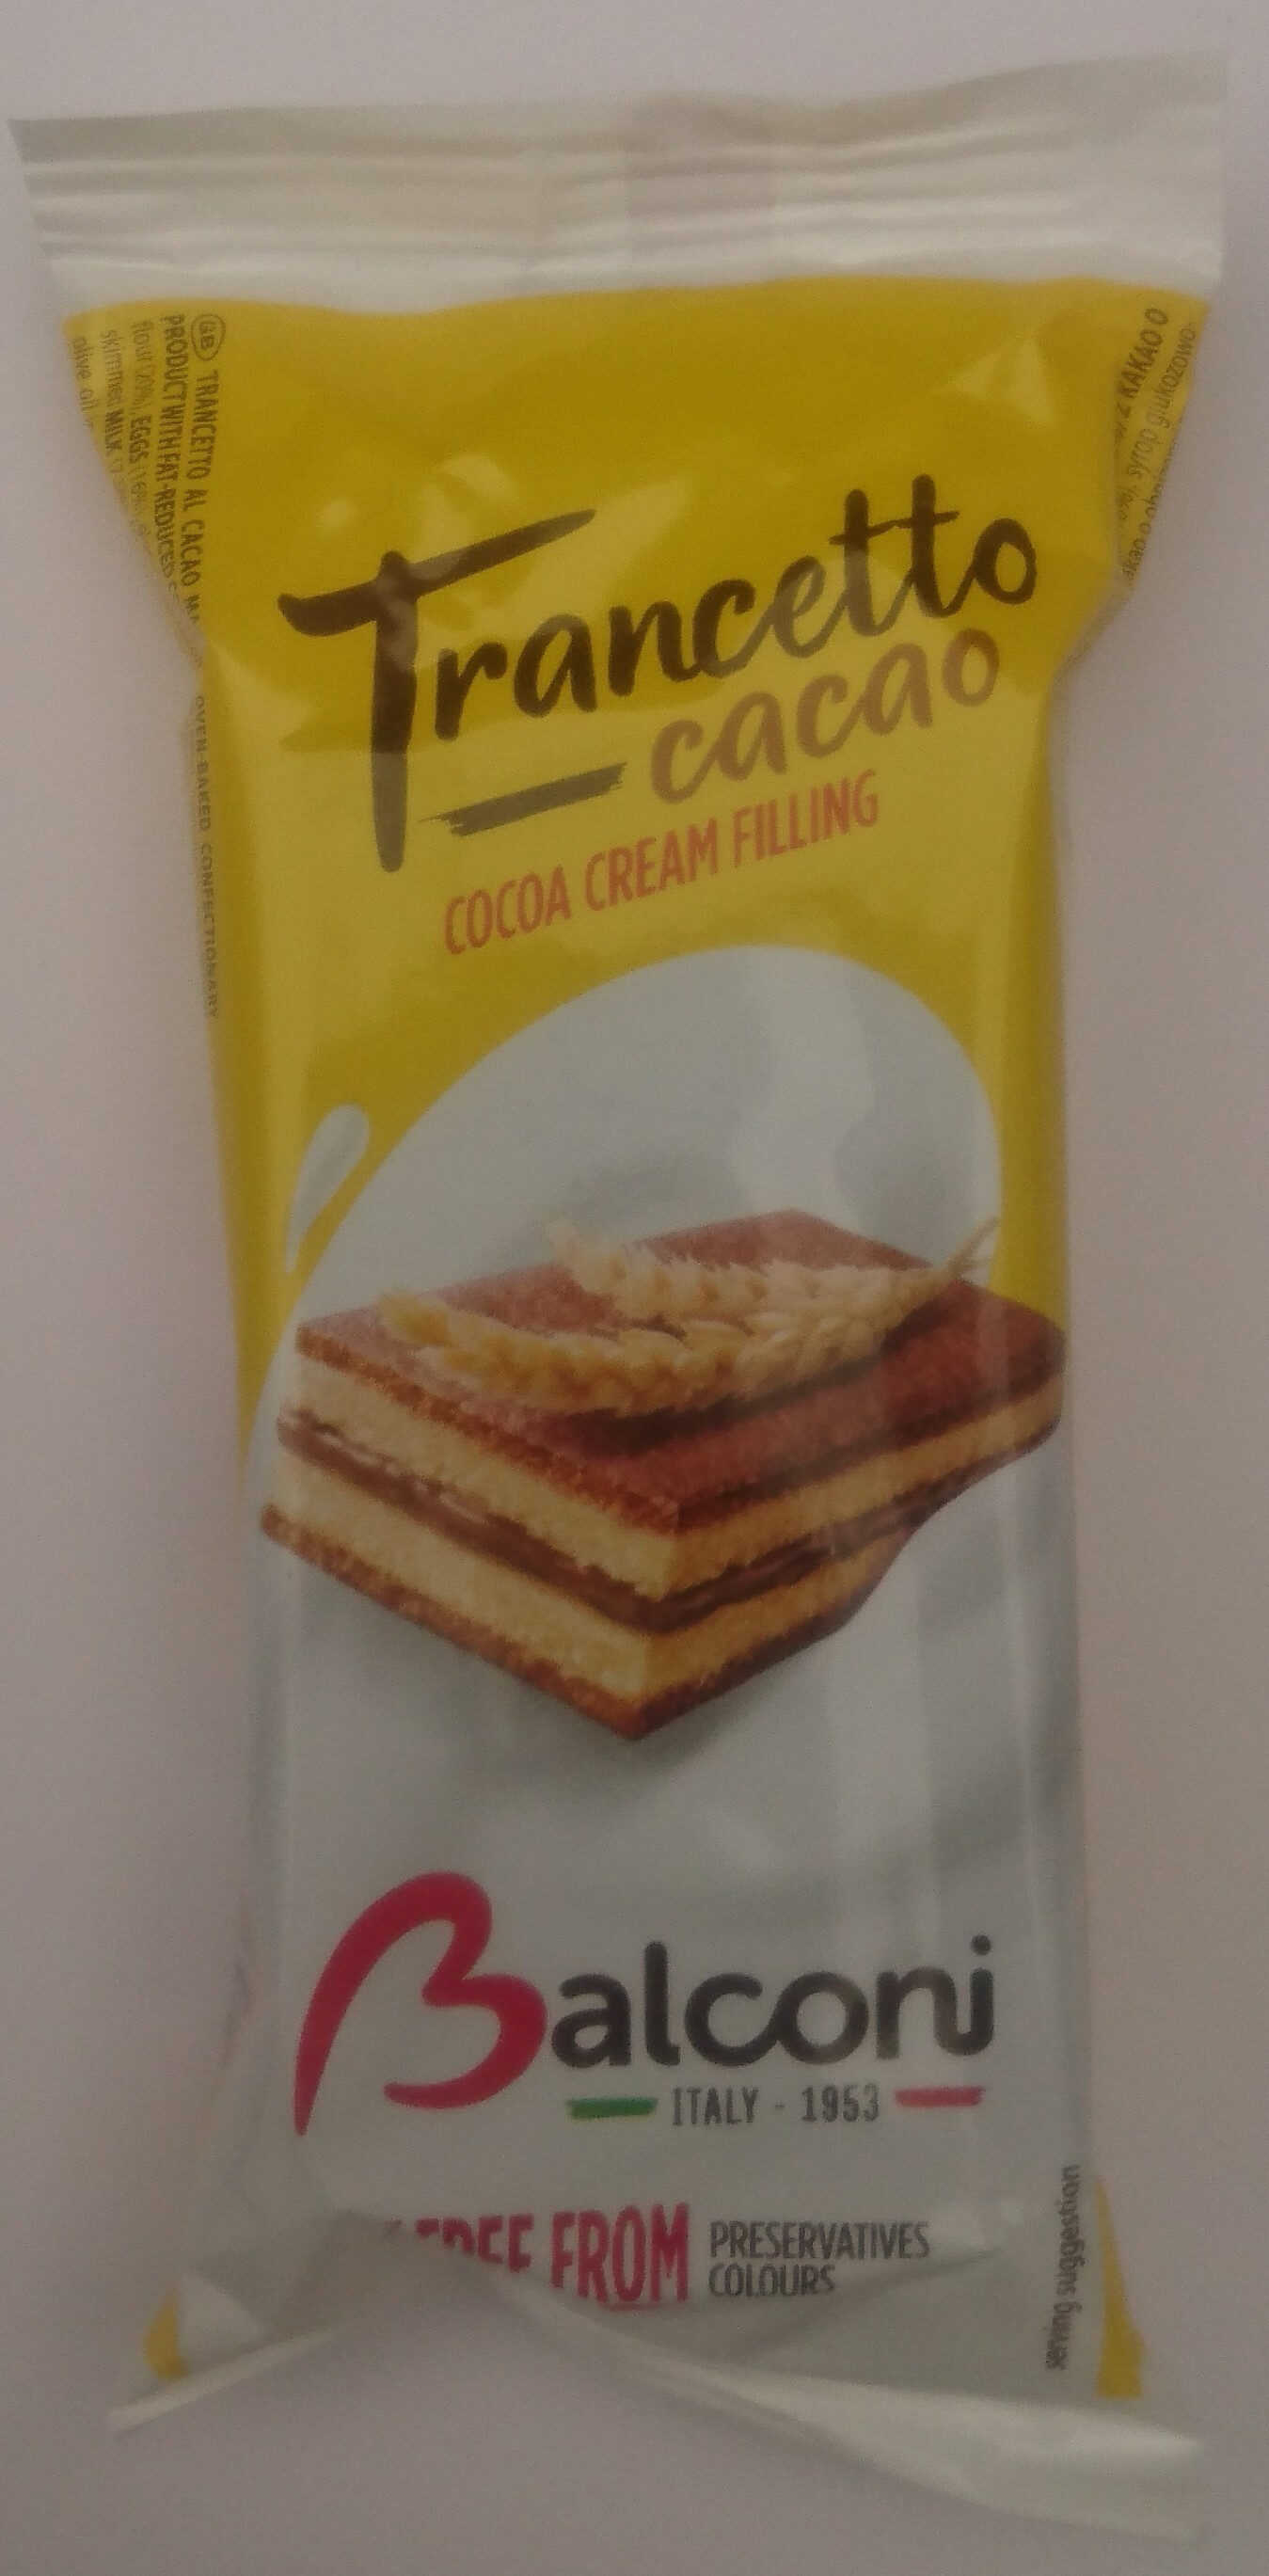 Trancetto Cacao - Product